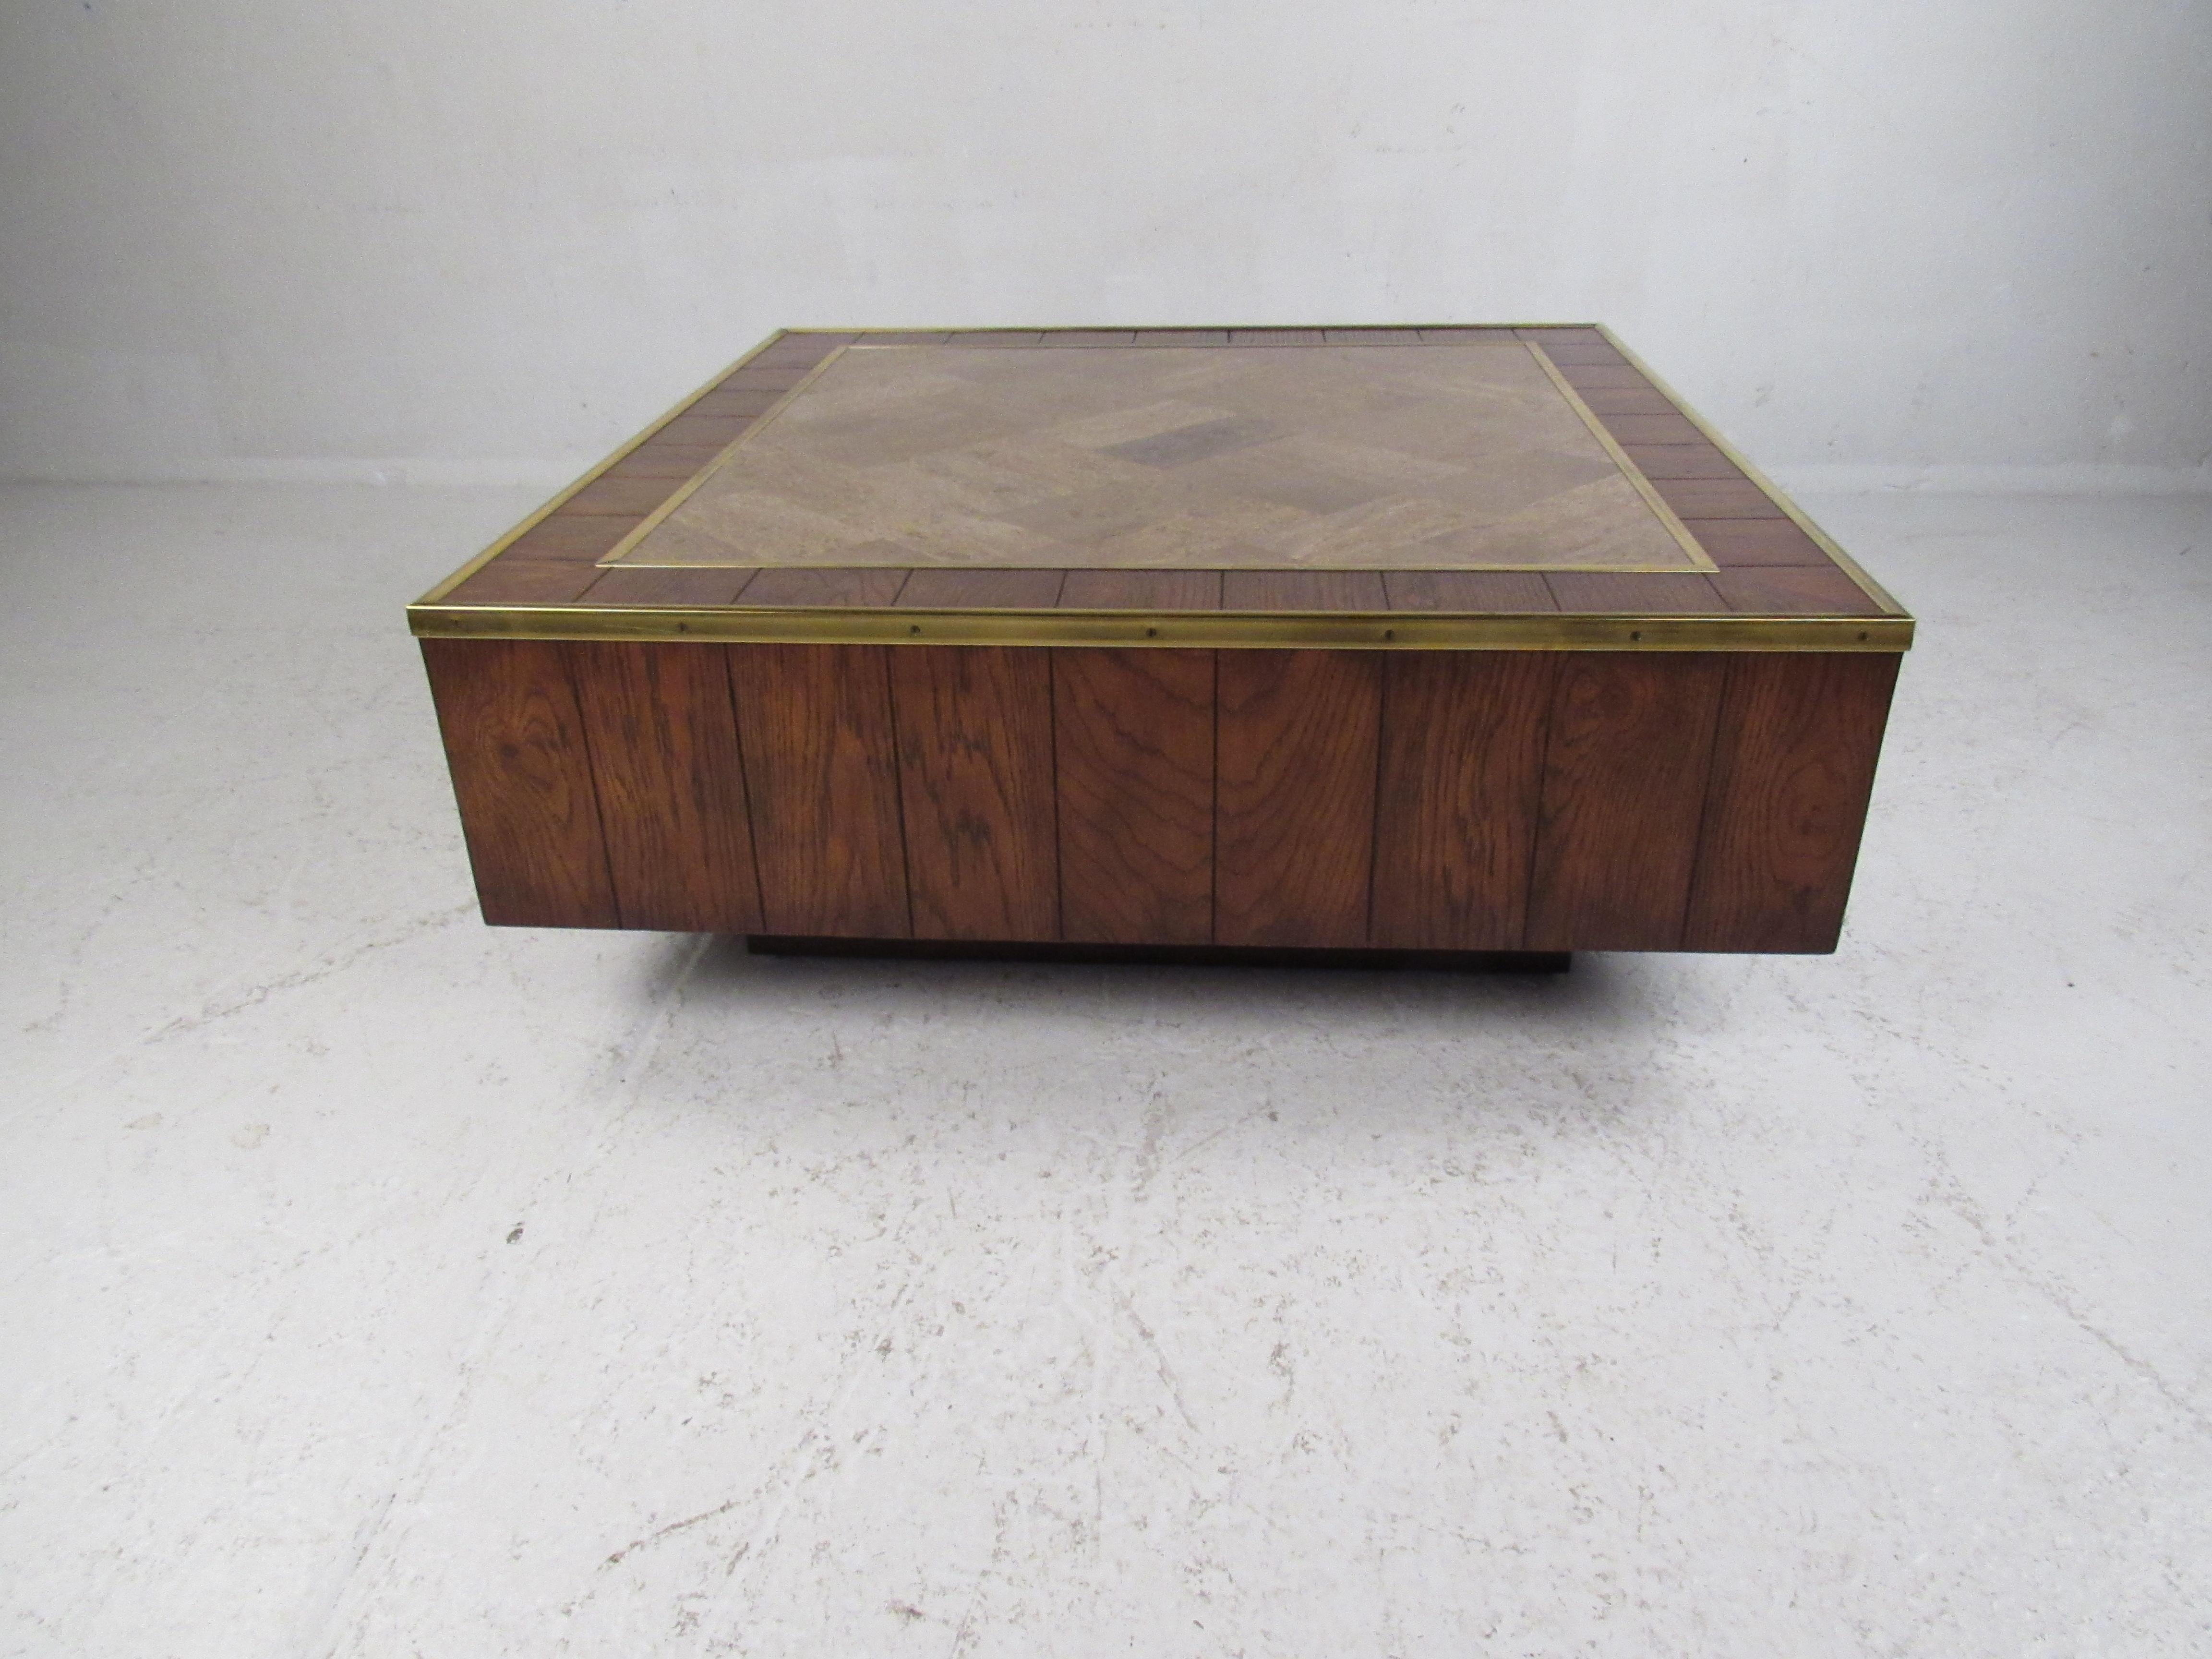 A unique vintage modern coffee table that boasts a tile-top with brass trim. Stylish design with paneled wood and a cubed pedestal base. This unusual Mid-Century Modern coffee table looks amazing in any home, business, or office. Please confirm item